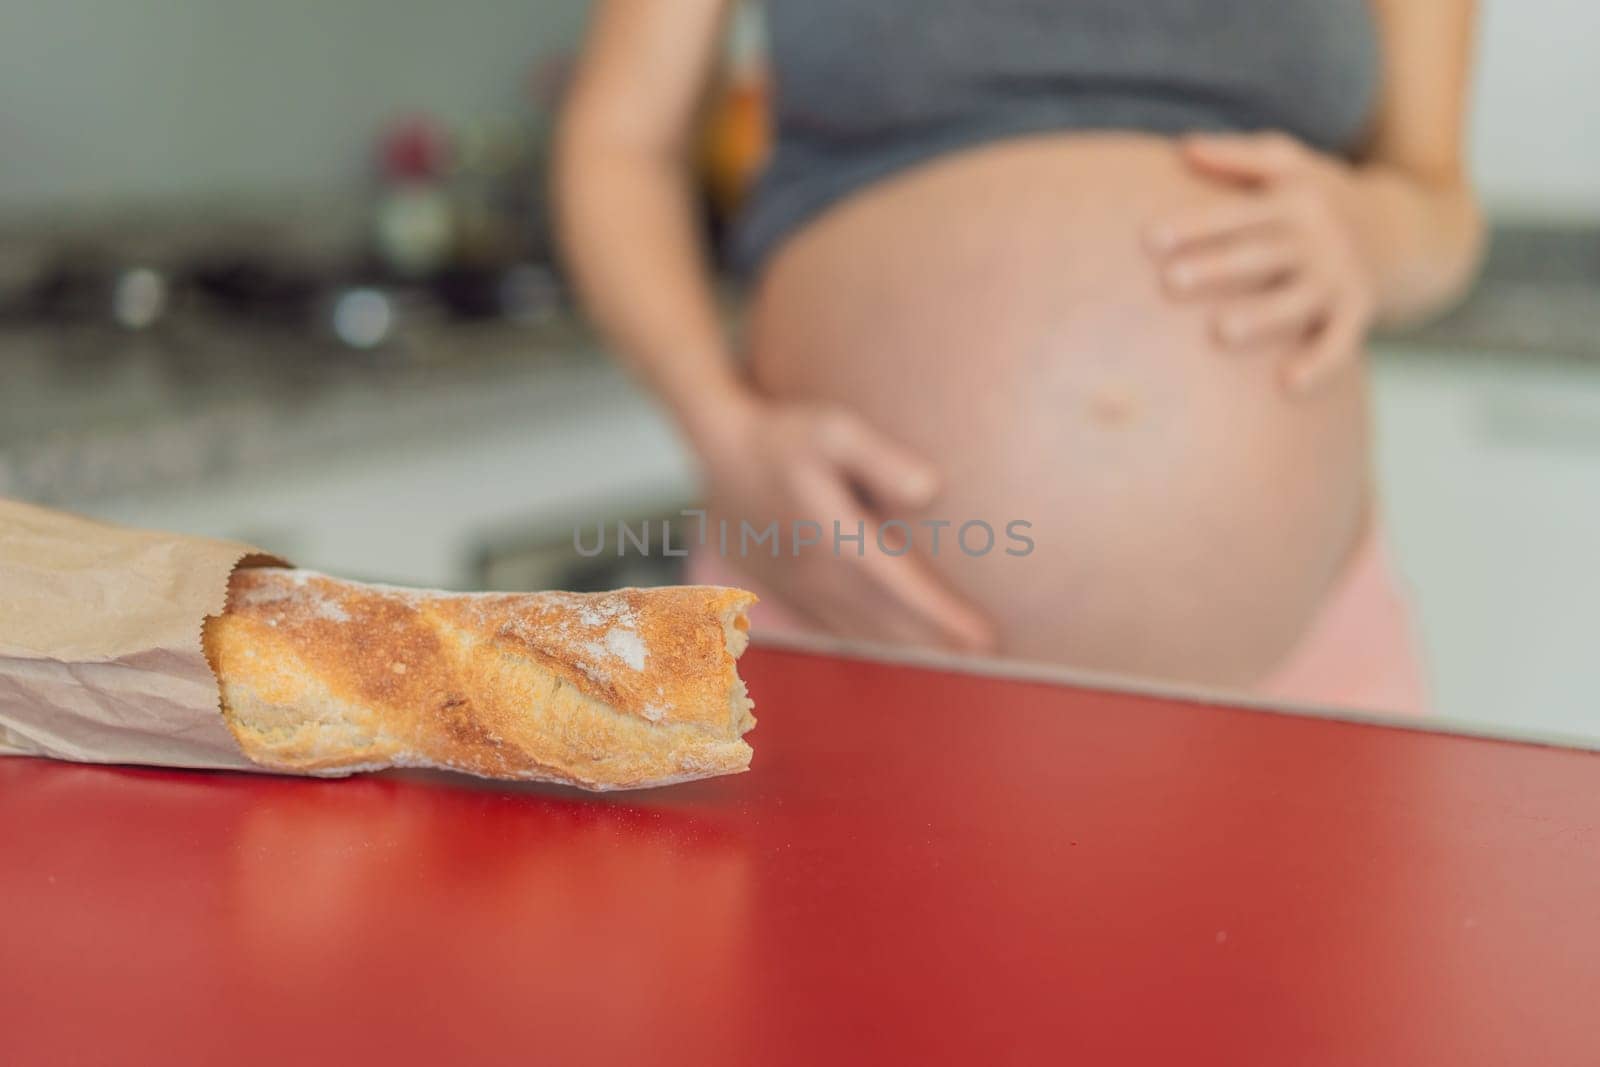 Pregnant woman eating bread in the kitchen. Exploring the impact of gluten during pregnancy: understanding the potential benefits and risks for maternal health and fetal development.